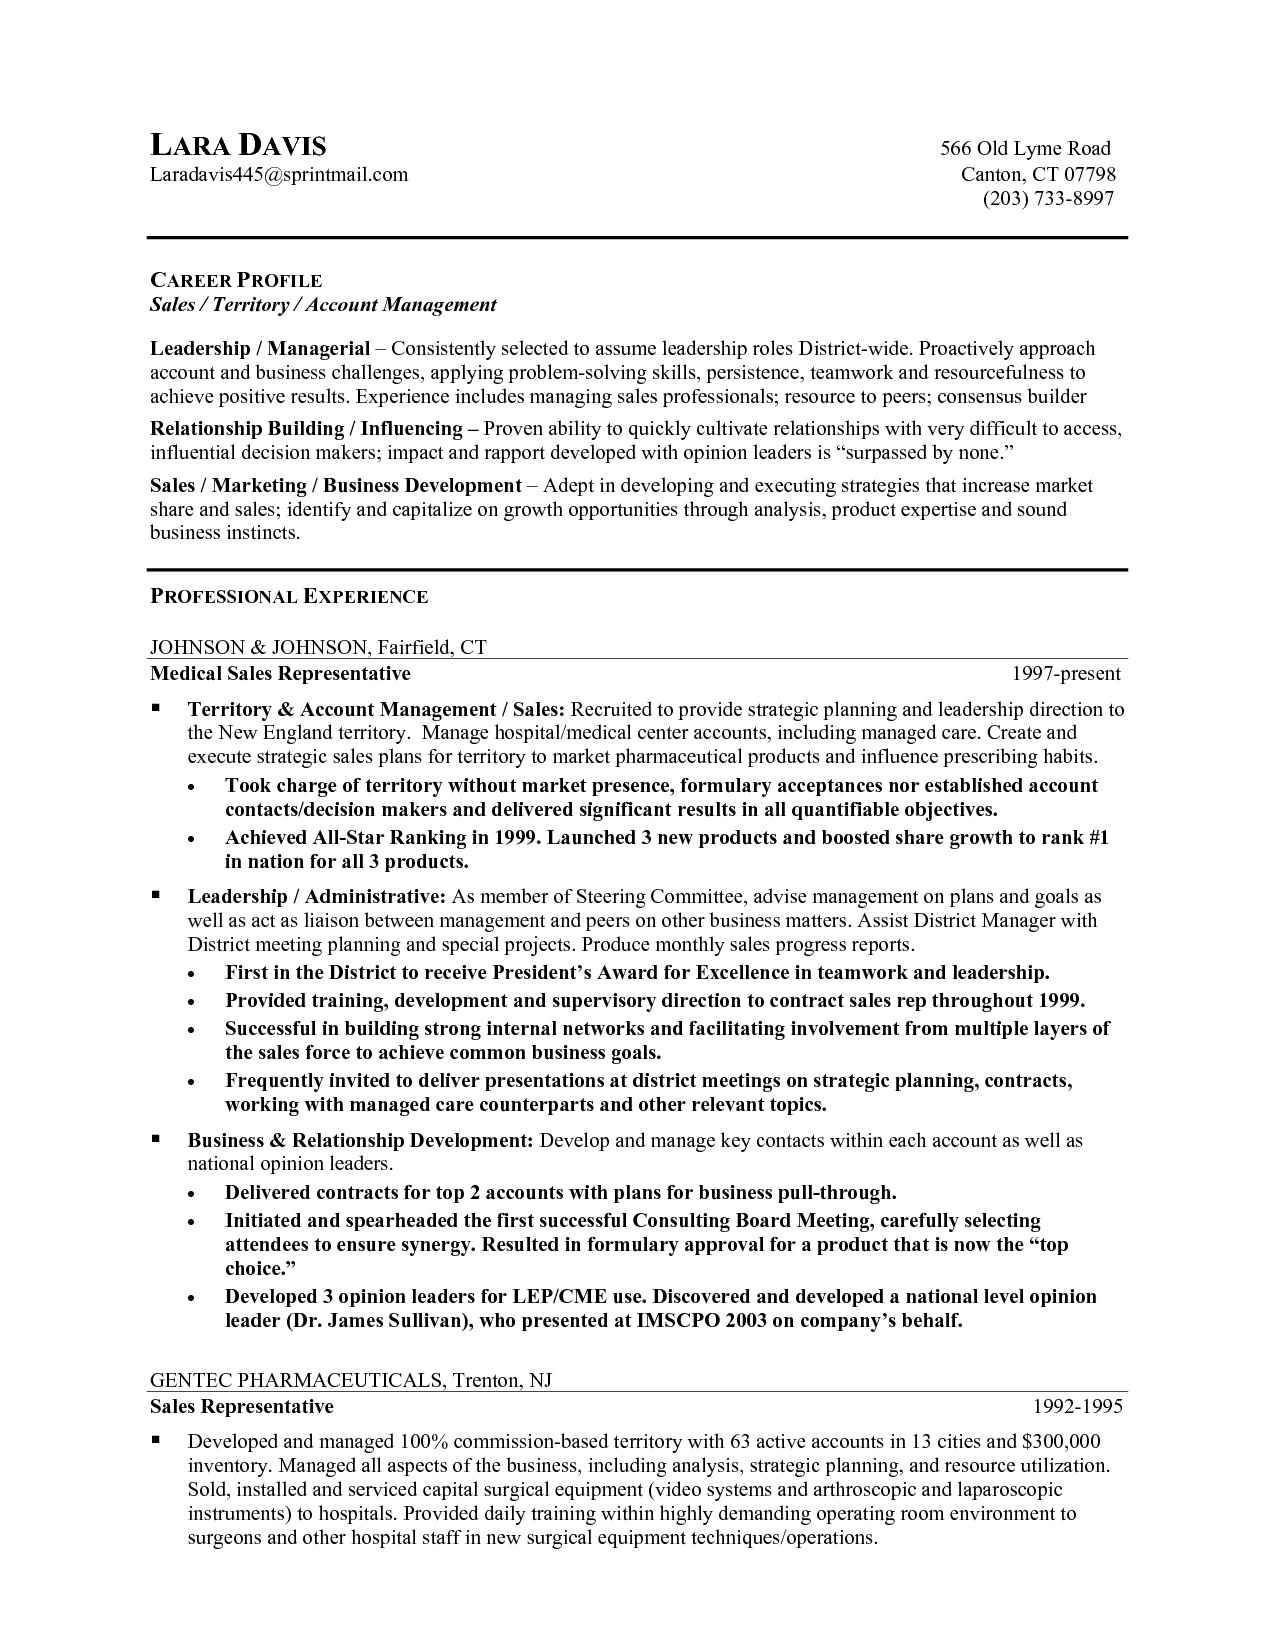 Samples Of Objectives for A Resume In Customer Service Customer Service Sales Resume Objective Examples Free